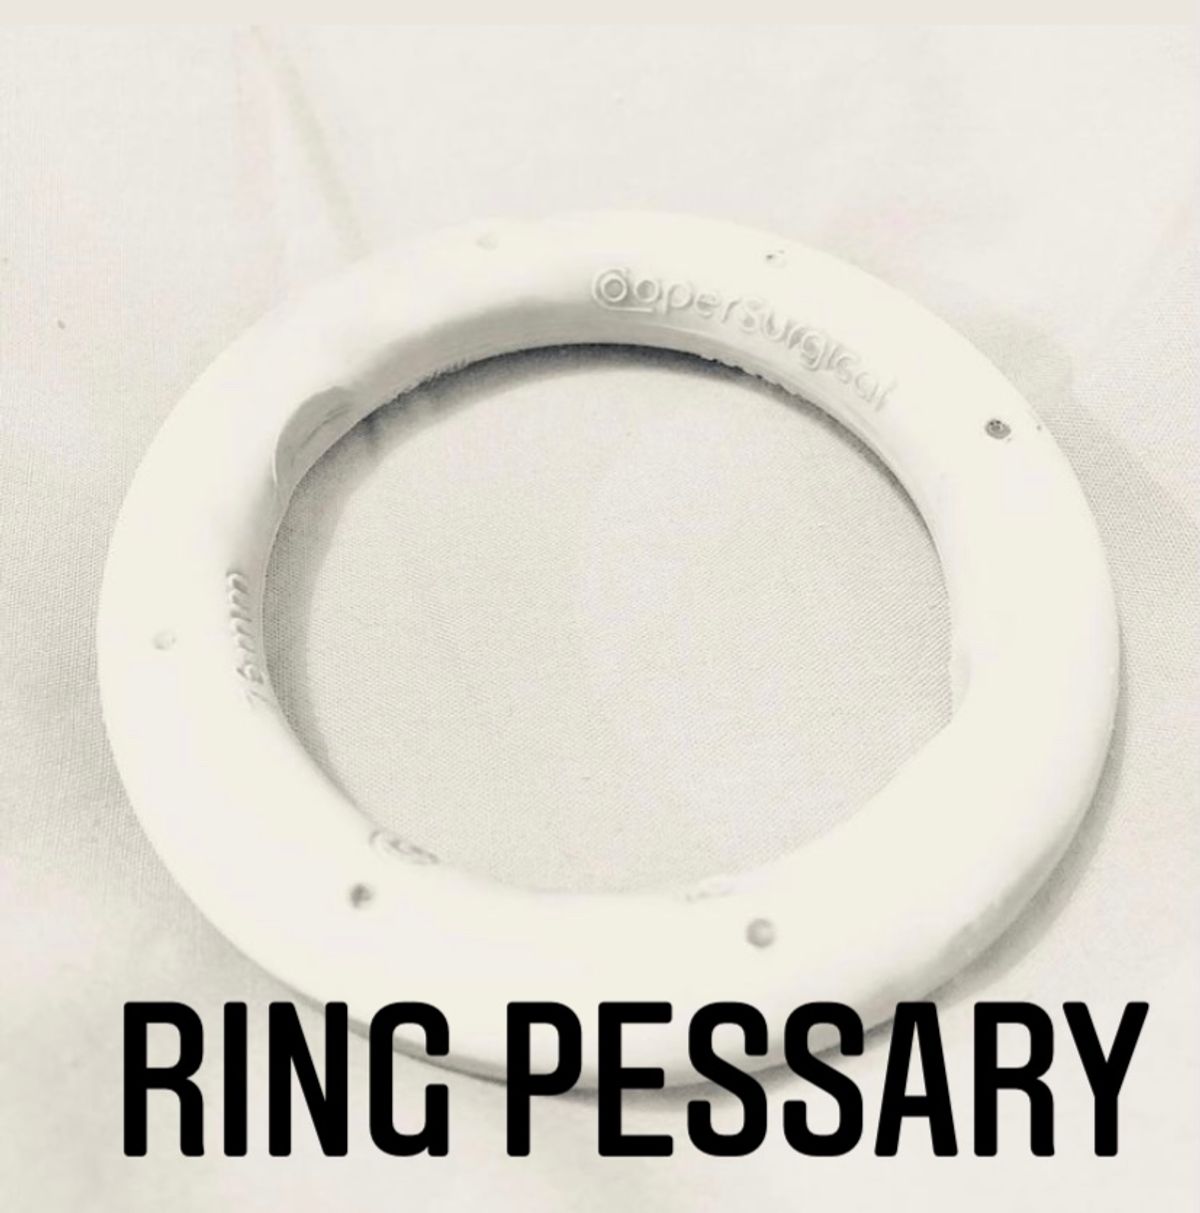 Photo of a ring pessary